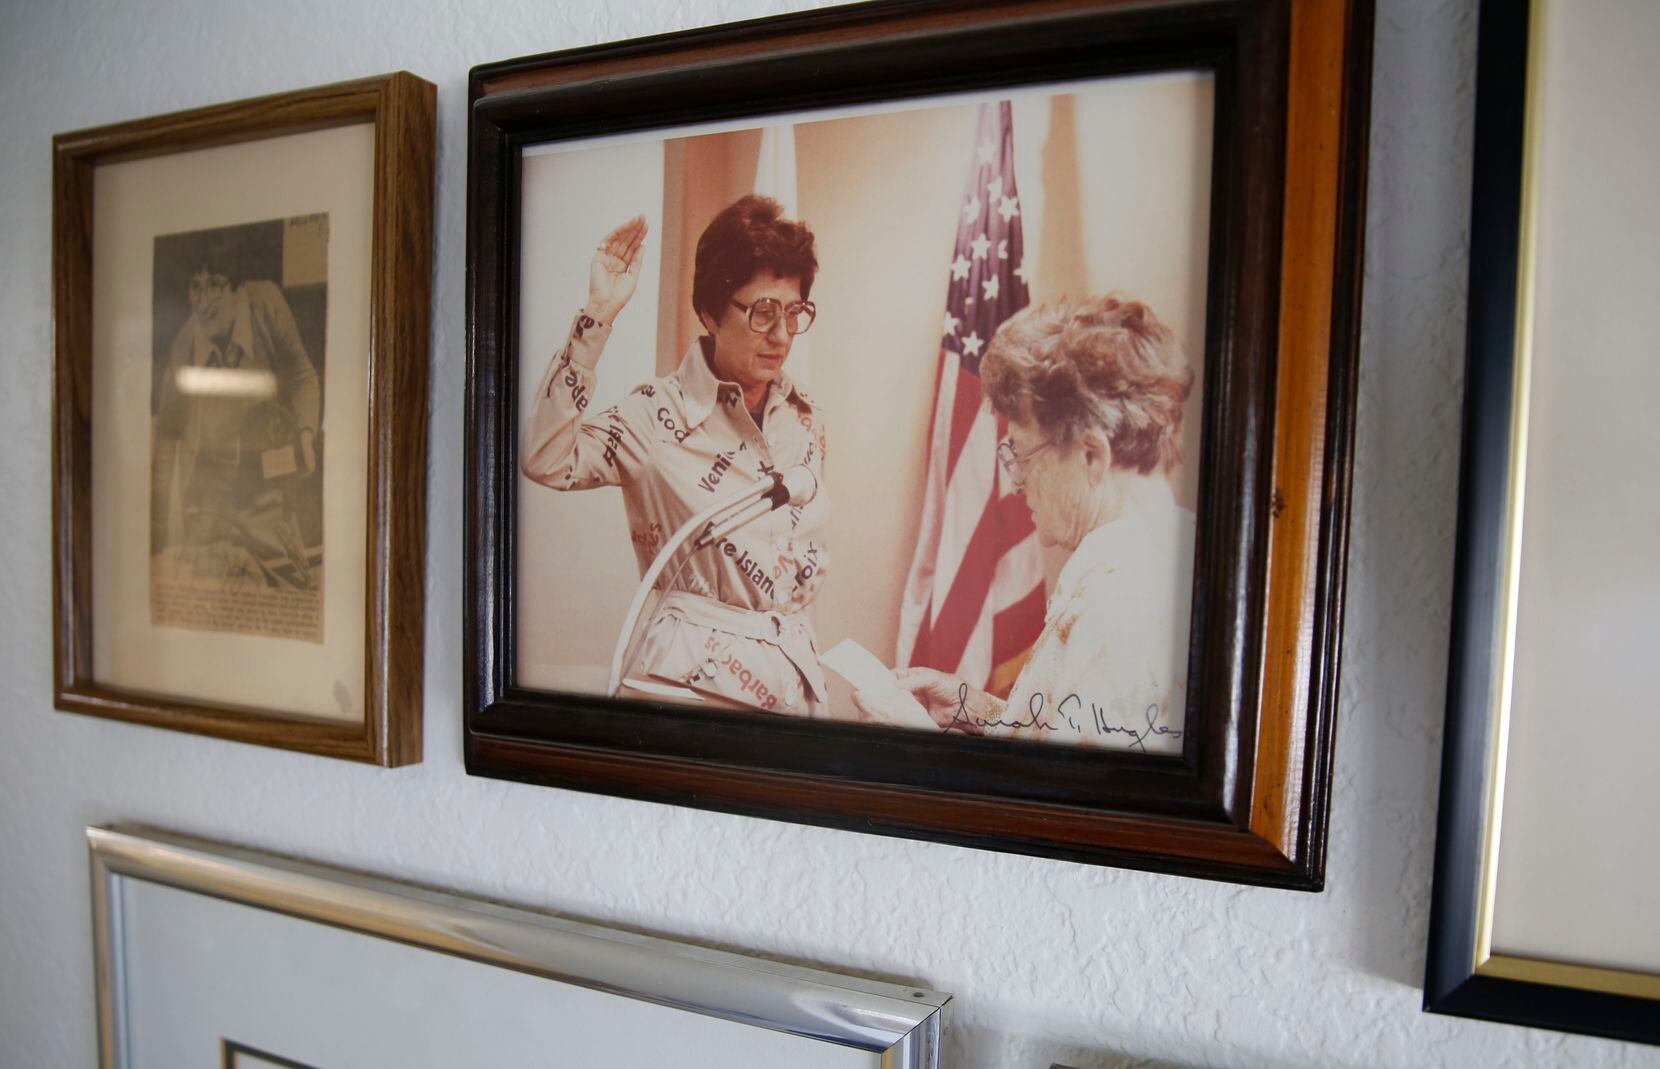 A photo at Adlene Harrison's home showed her beiing sworn in as EPA regional administrator.